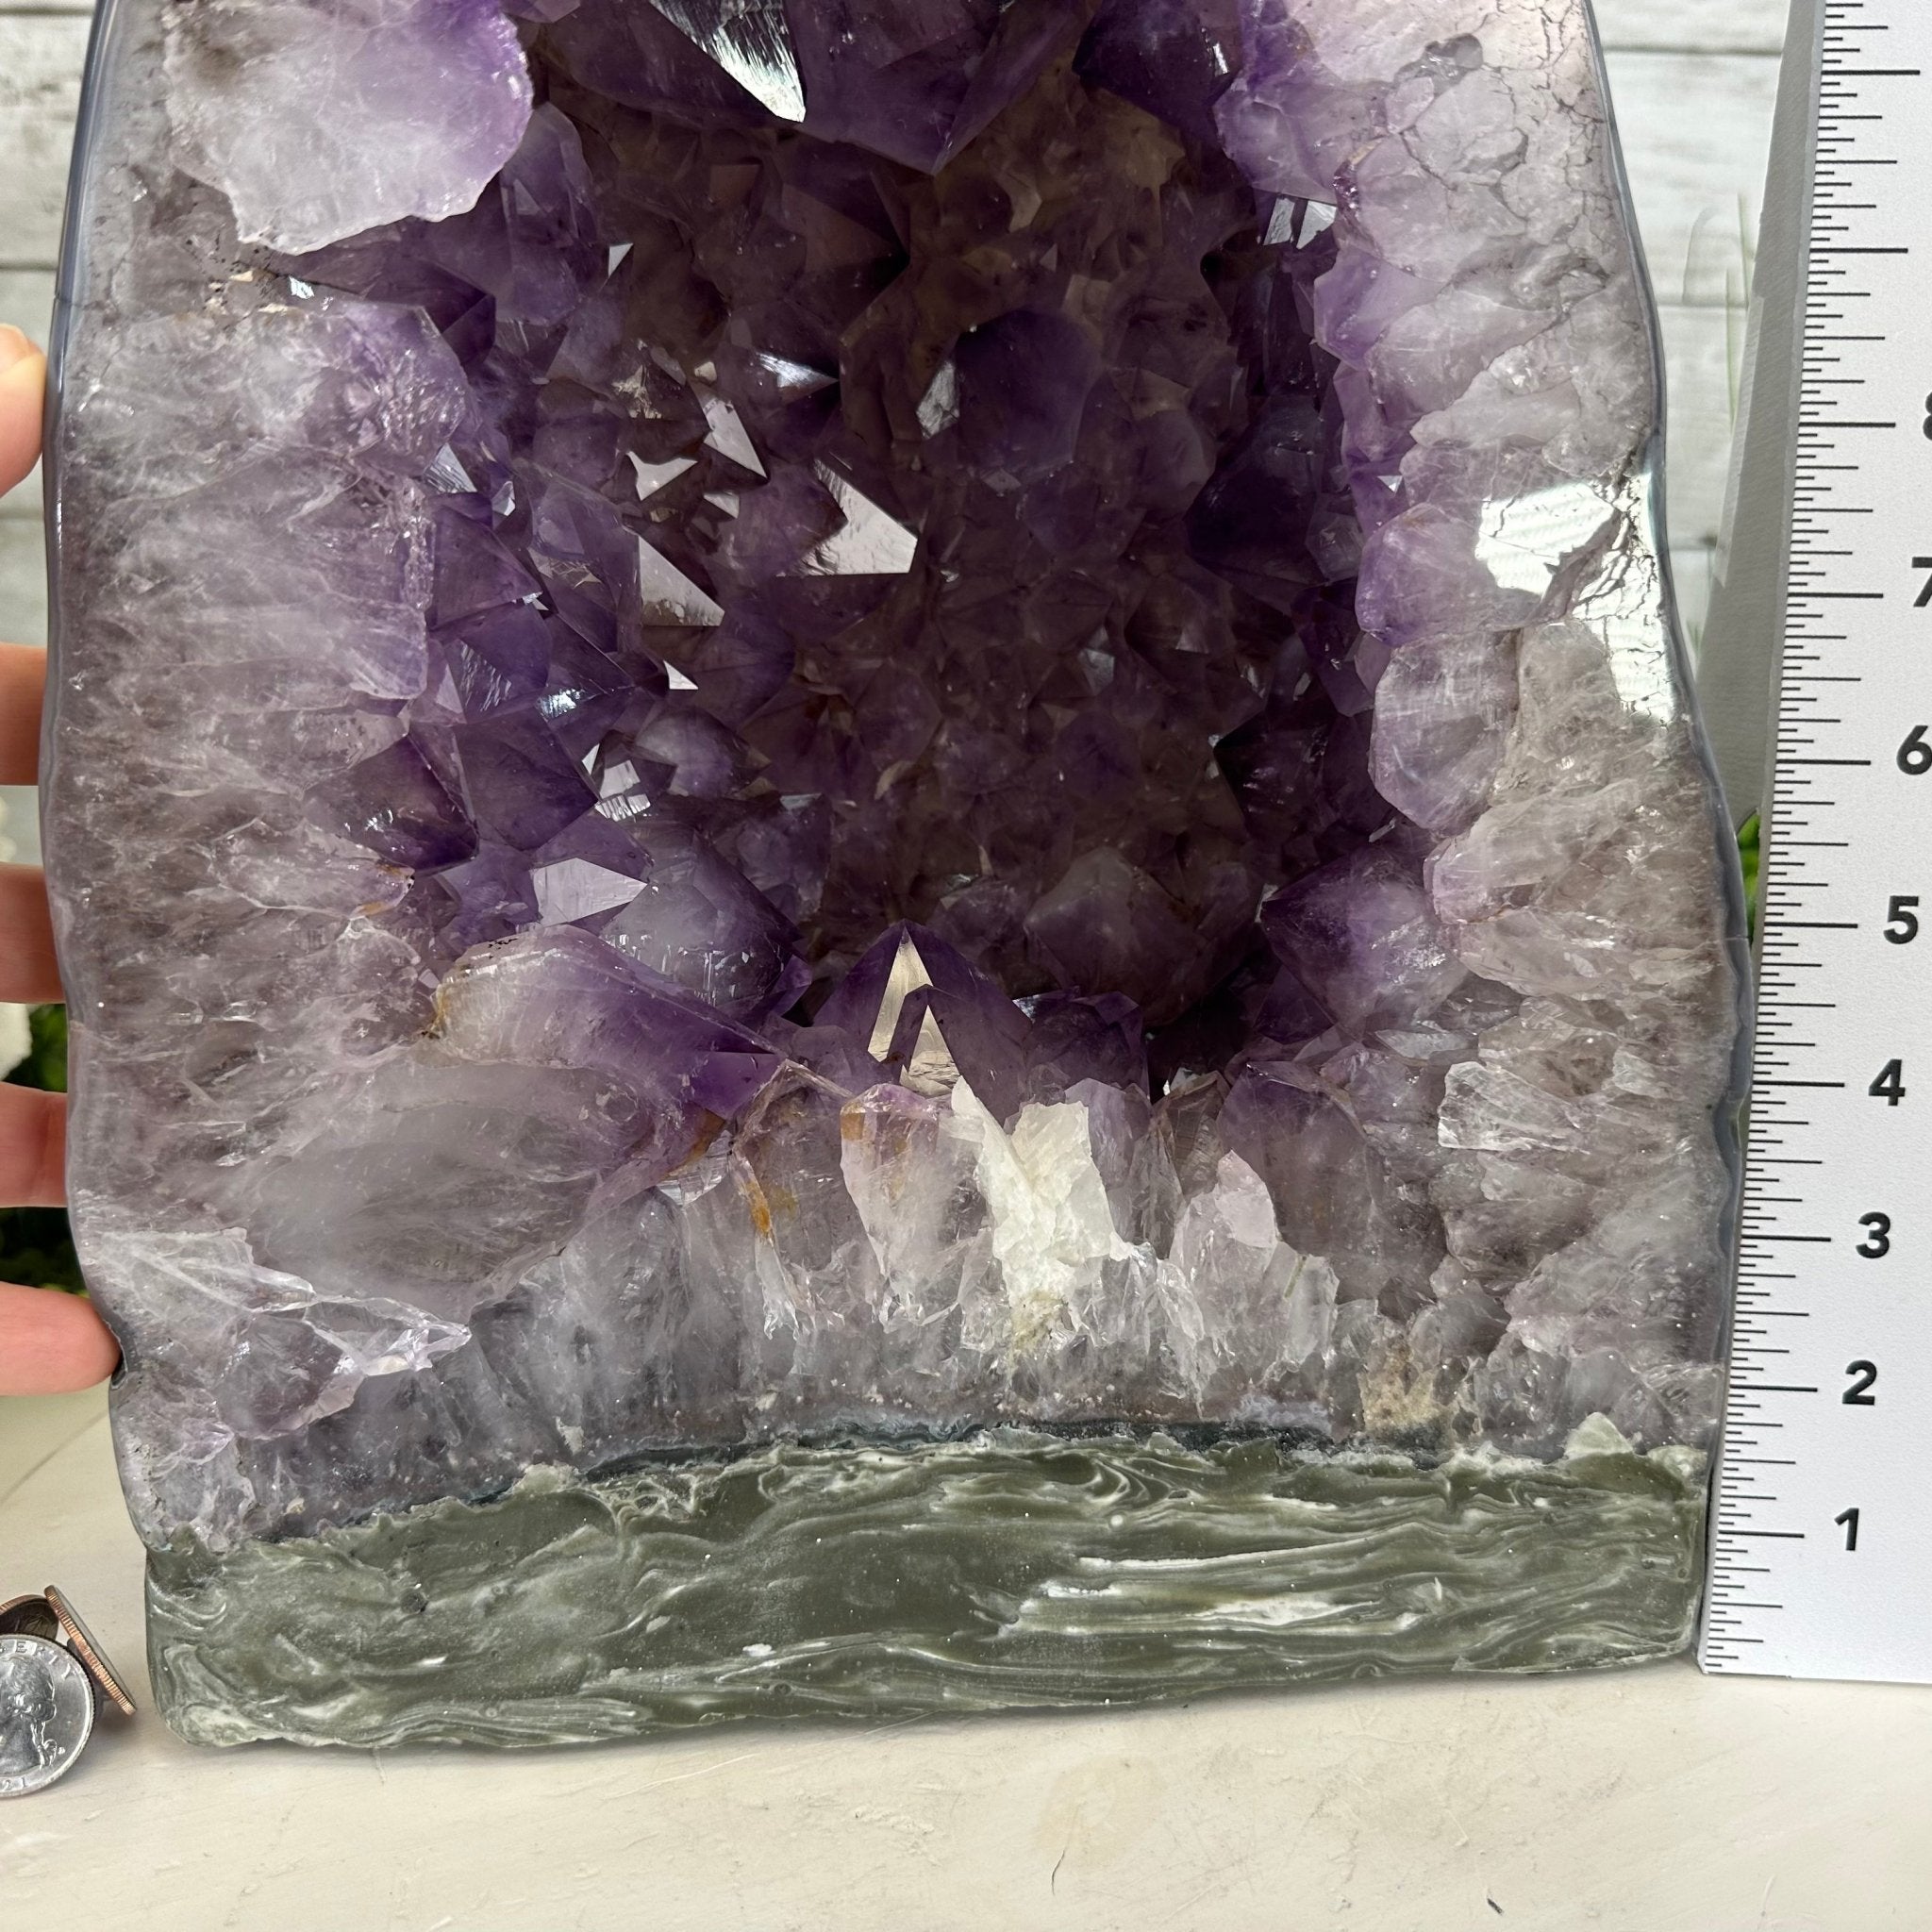 Extra Quality Polished Brazilian Amethyst Cathedral, 40 lbs & 15.5" tall Model #5602-0157 by Brazil Gems - Brazil GemsBrazil GemsExtra Quality Polished Brazilian Amethyst Cathedral, 40 lbs & 15.5" tall Model #5602-0157 by Brazil GemsPolished Cathedrals5602-0157